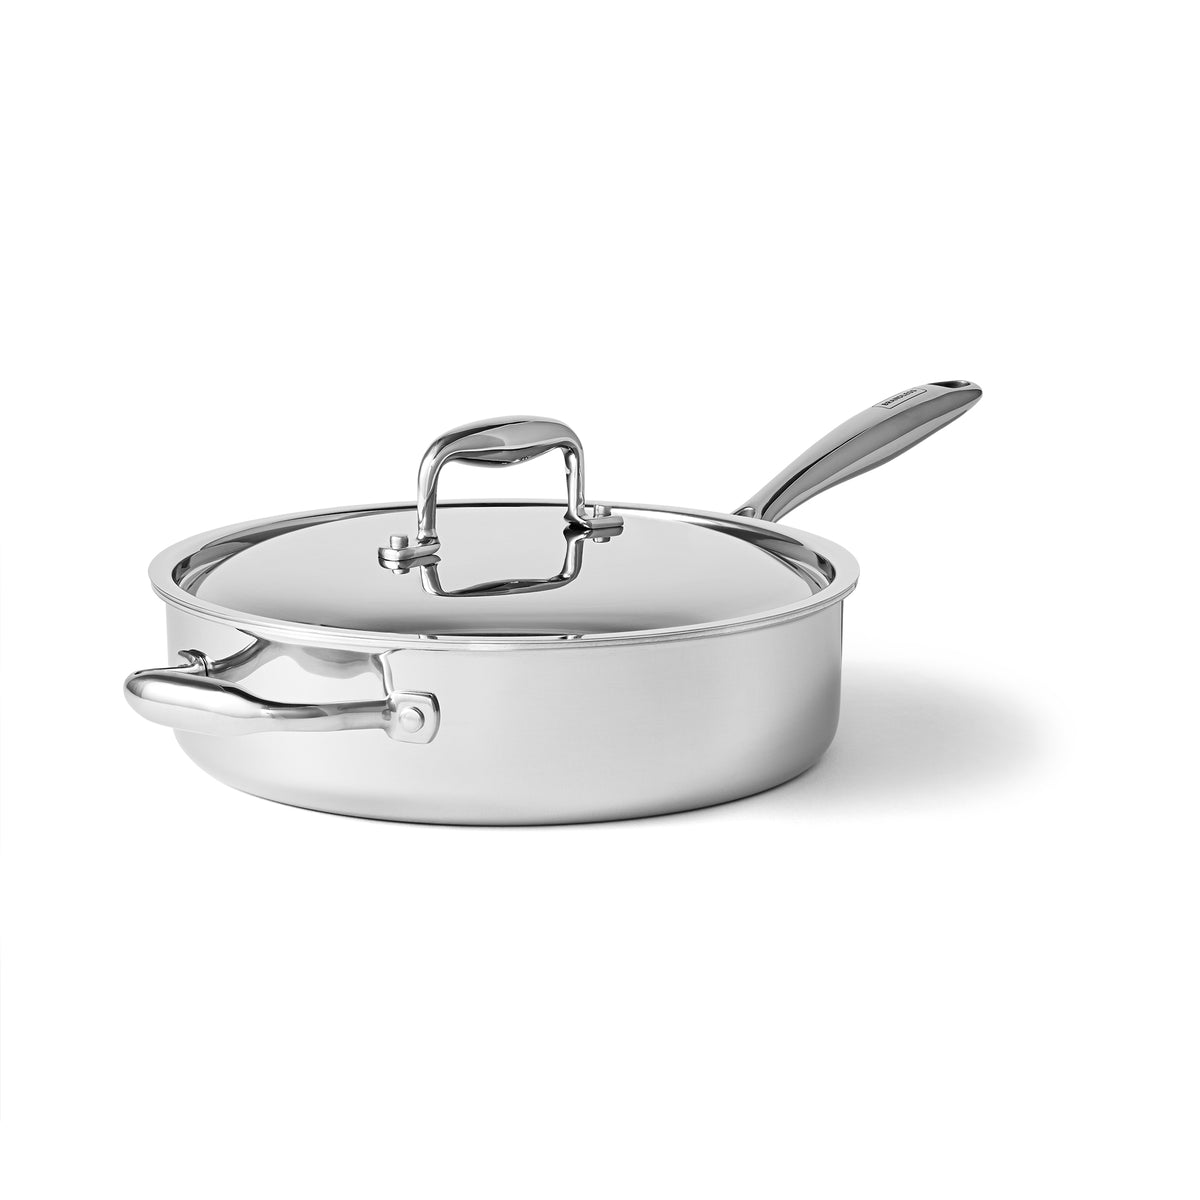 Product photo, 4 quart saute pan with lid, 3/4 view.